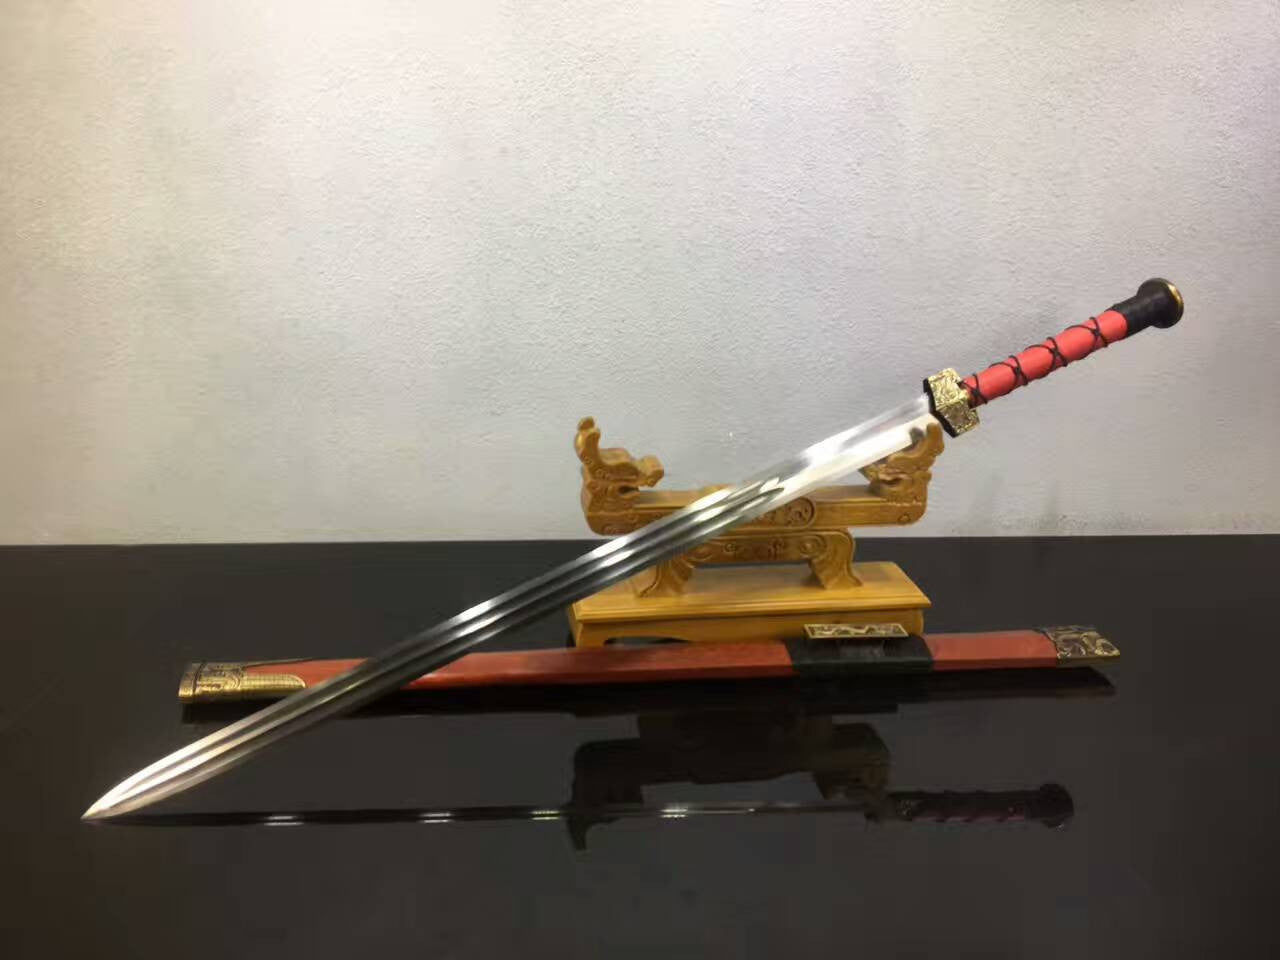 Chinese sword,Han jian(Folding steel blade,Redwood scabbard,Alloy fitted)Length 41" - Chinese sword shop